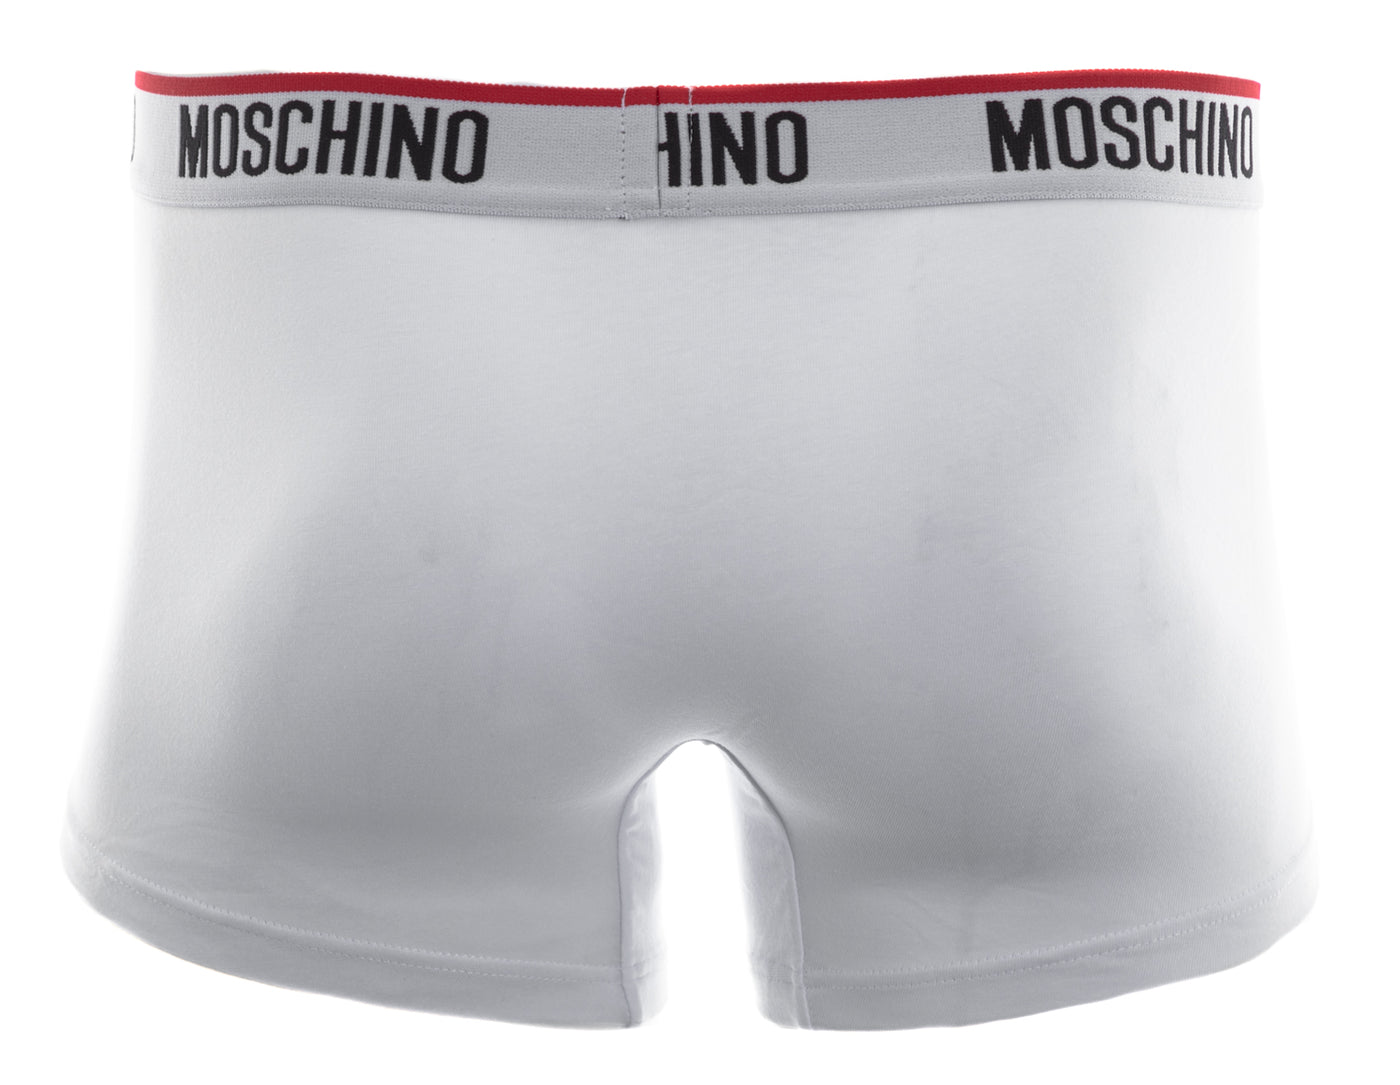 Moschino Underwear Tri Pack Boxers in White Back